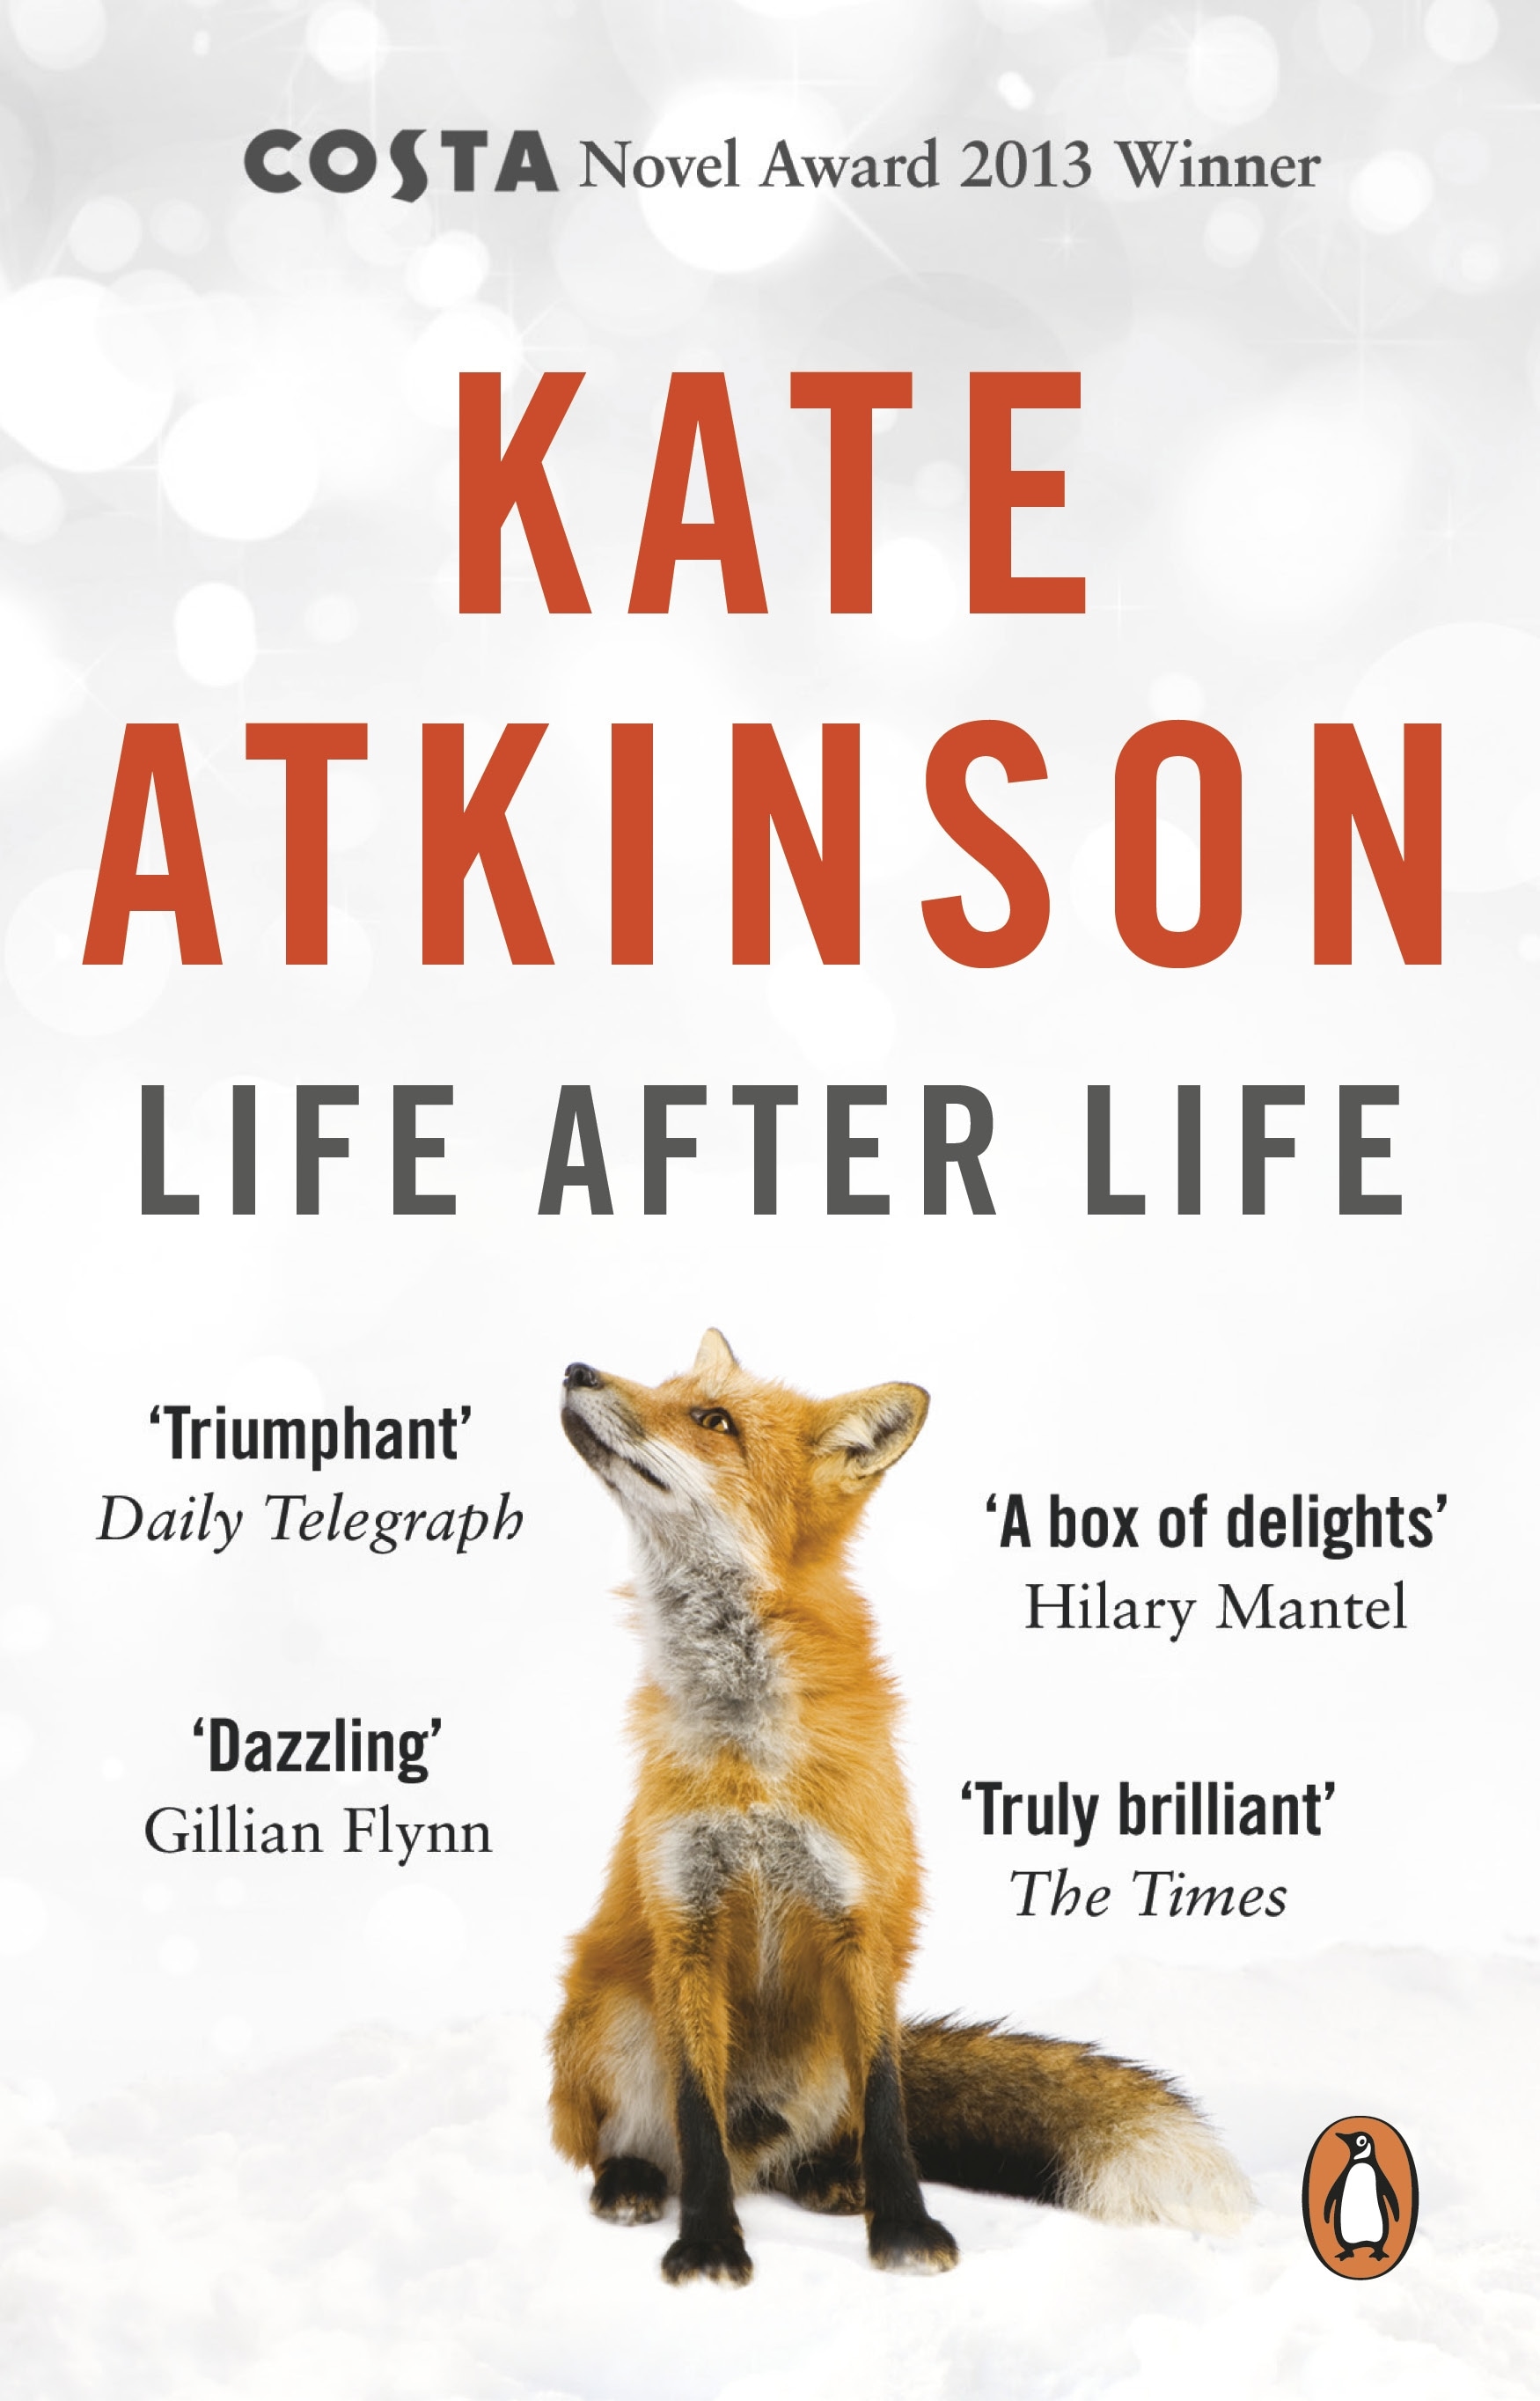 Book “Life After Life” by Kate Atkinson — January 30, 2014